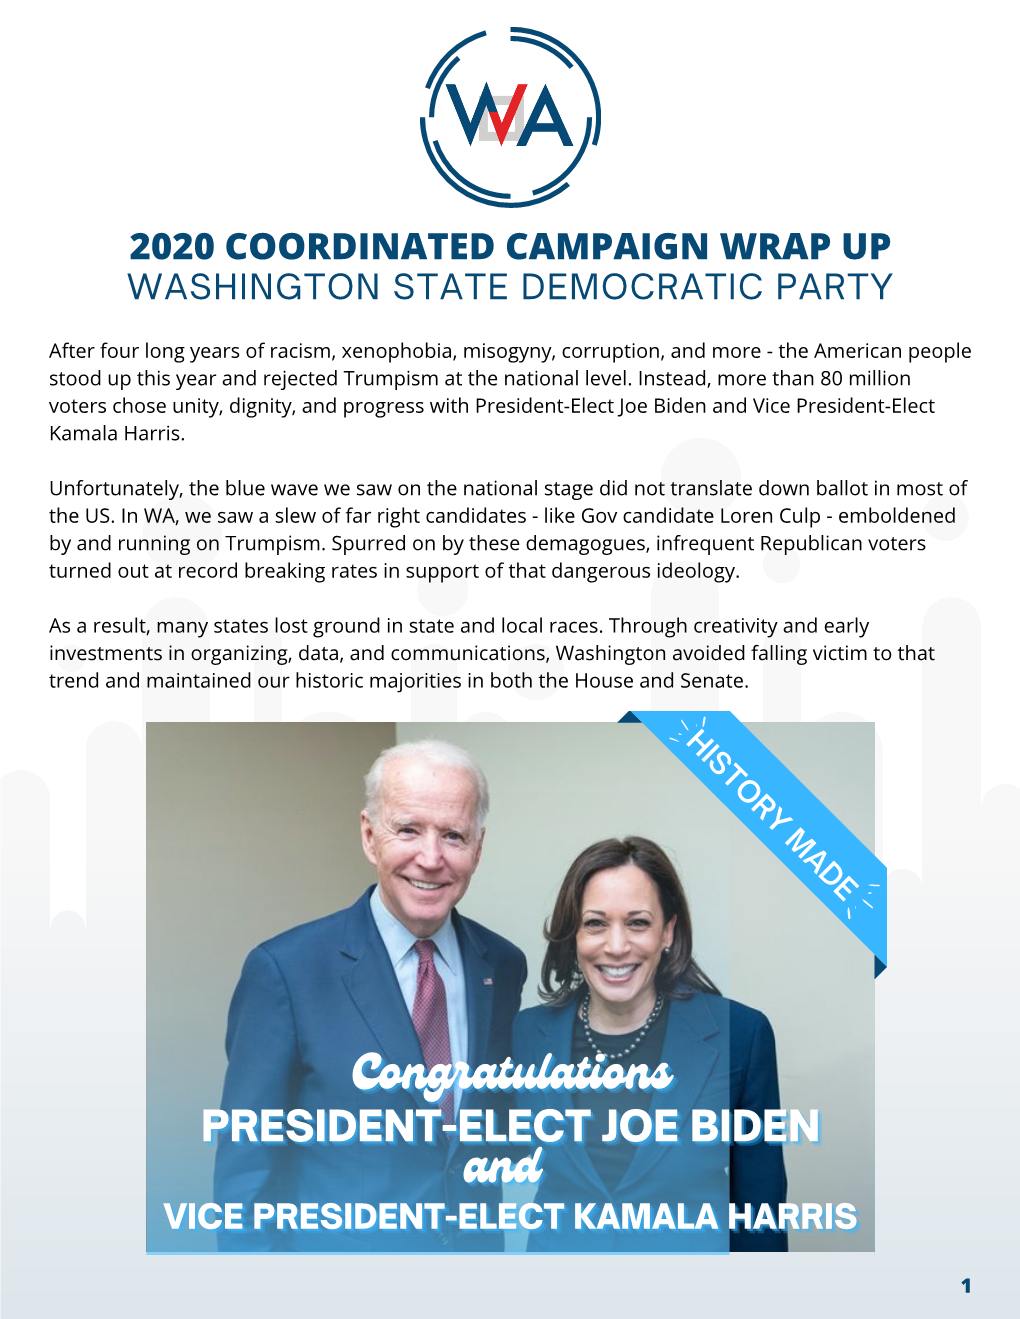 2020 Coordinated Campaign Wrap up Washington State Democratic Party